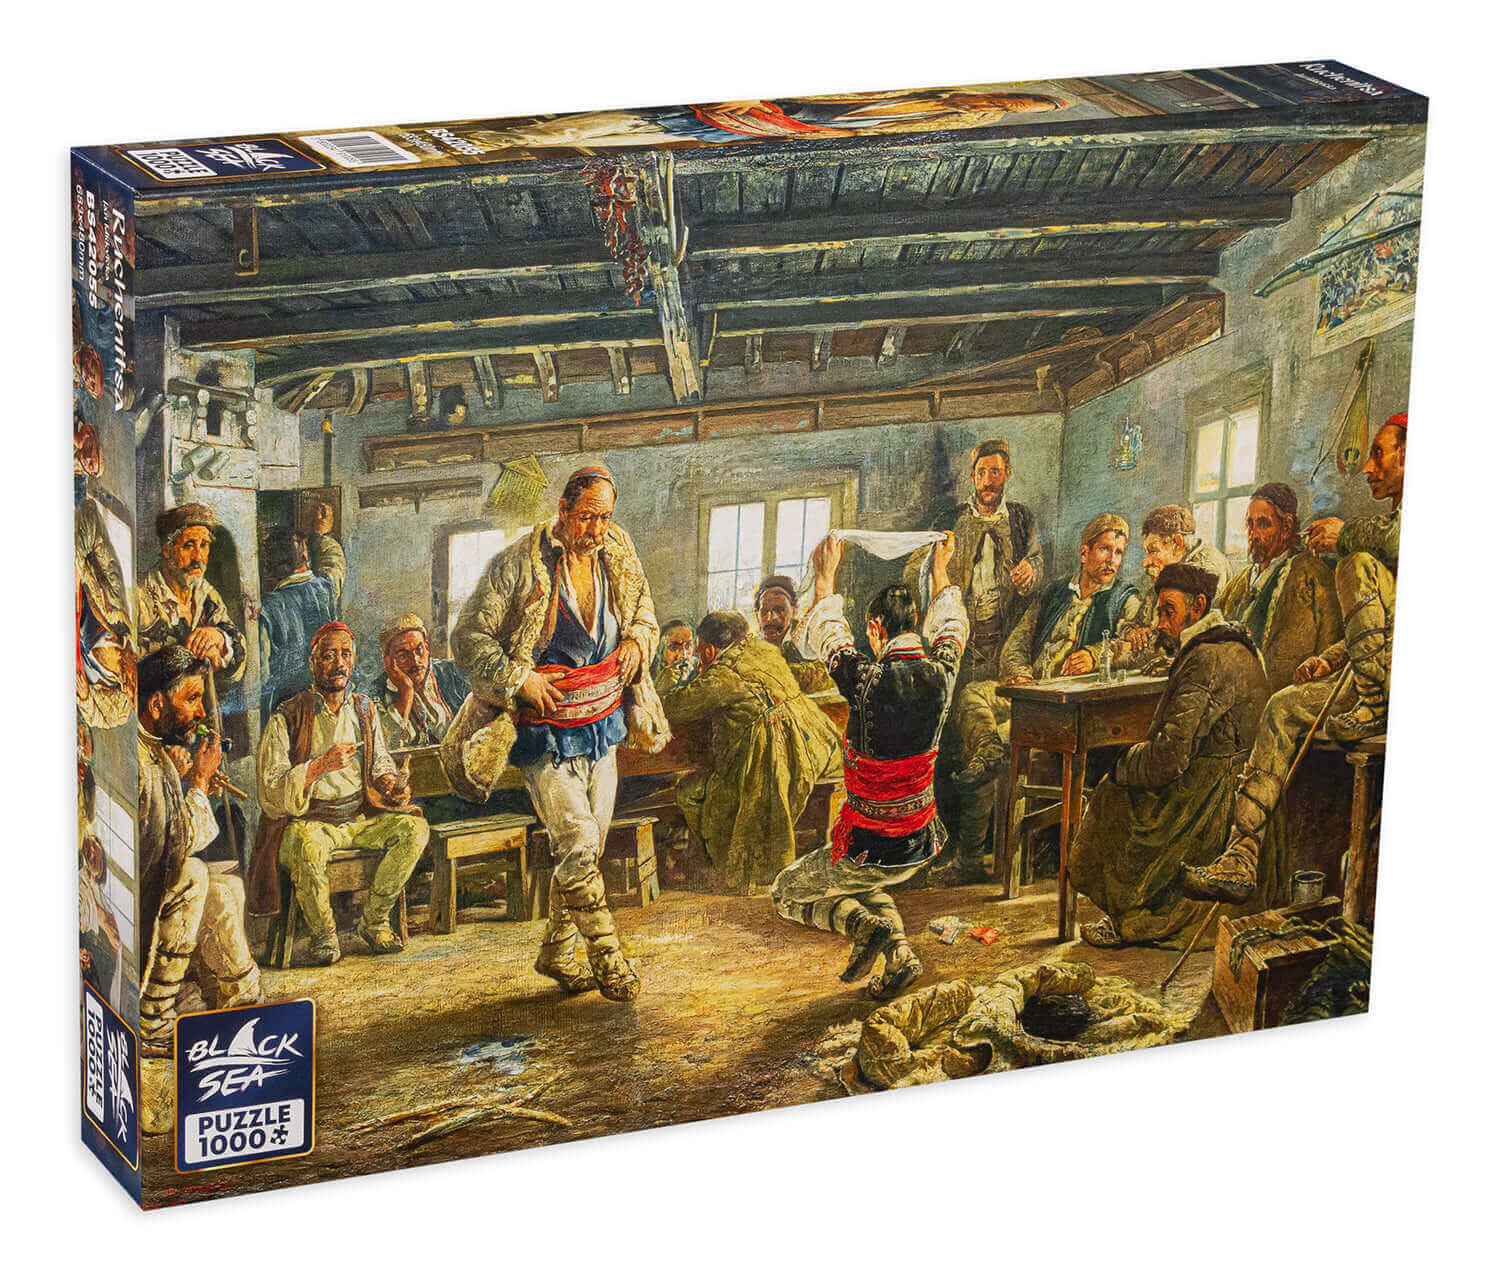 Puzzle Black Sea Premium 1000 pieces - Ruchenitsa, James D. Bourchier, a correspondent for The Times in Bulgaria, was a vivid fan of the country. Perhaps it was fate that brought him together with two other distinguished men in the tavern in the village o